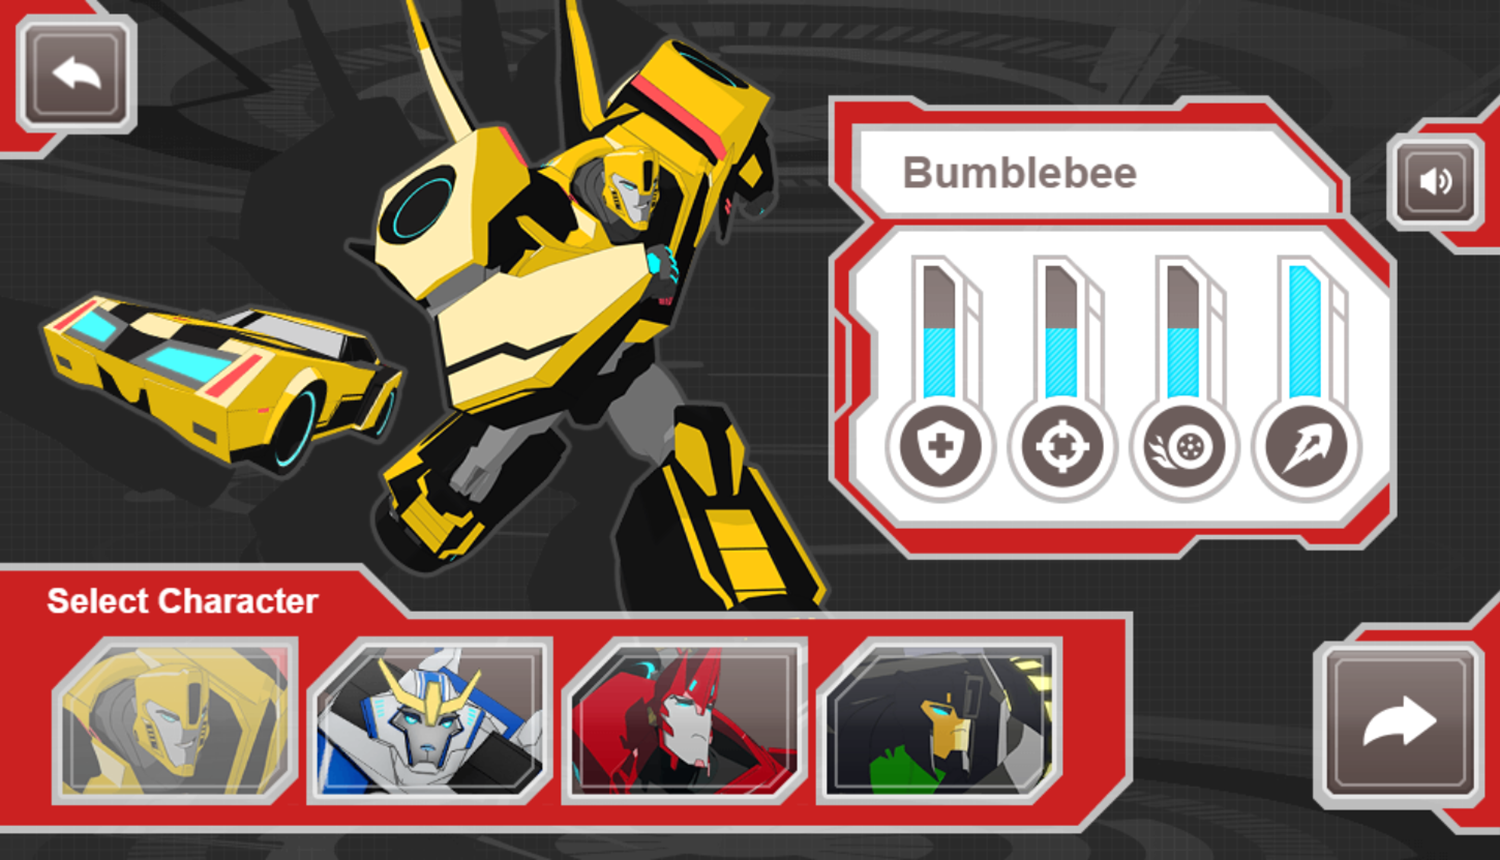 Transformers Protect Crown City Game Character Select Screenshot.